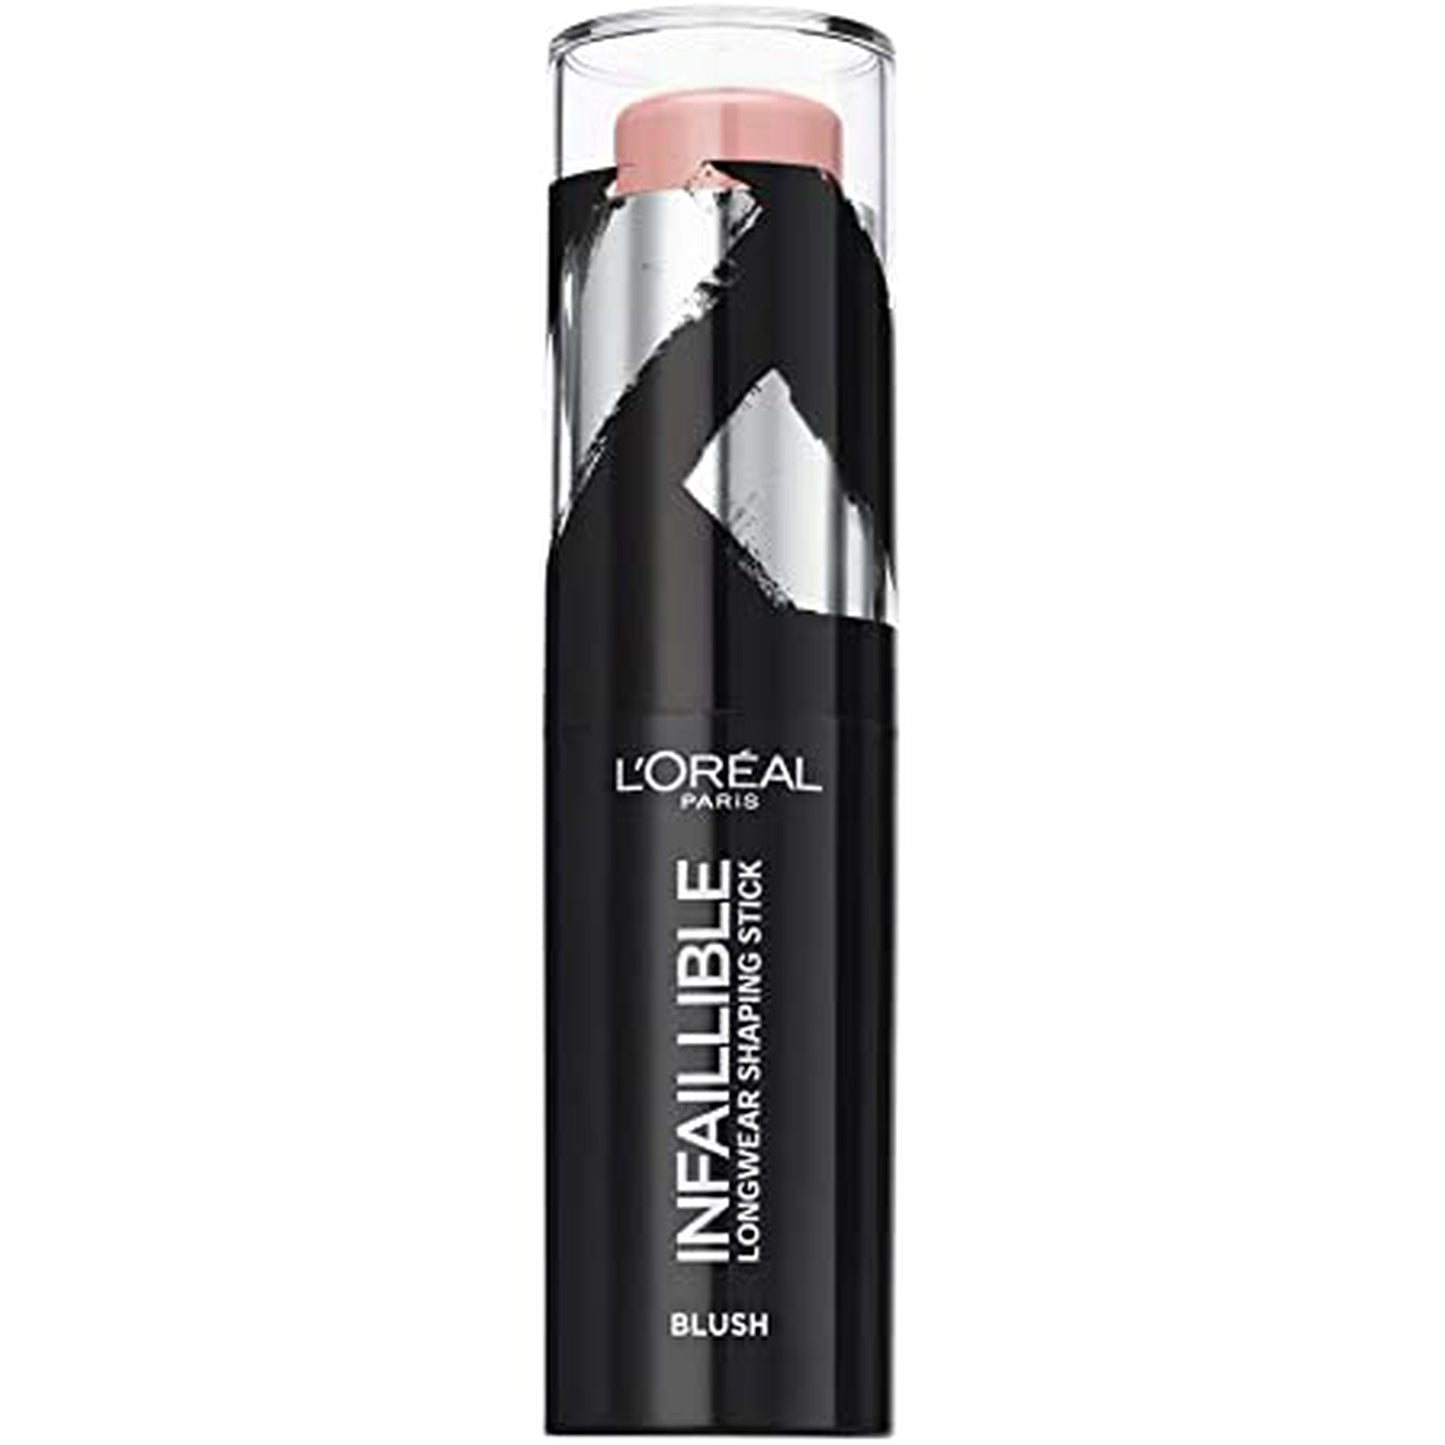 L'Oreal Infallible Foundation Stick - 001 Sexy Flush-L'Oreal-BeautyNmakeup.co.uk